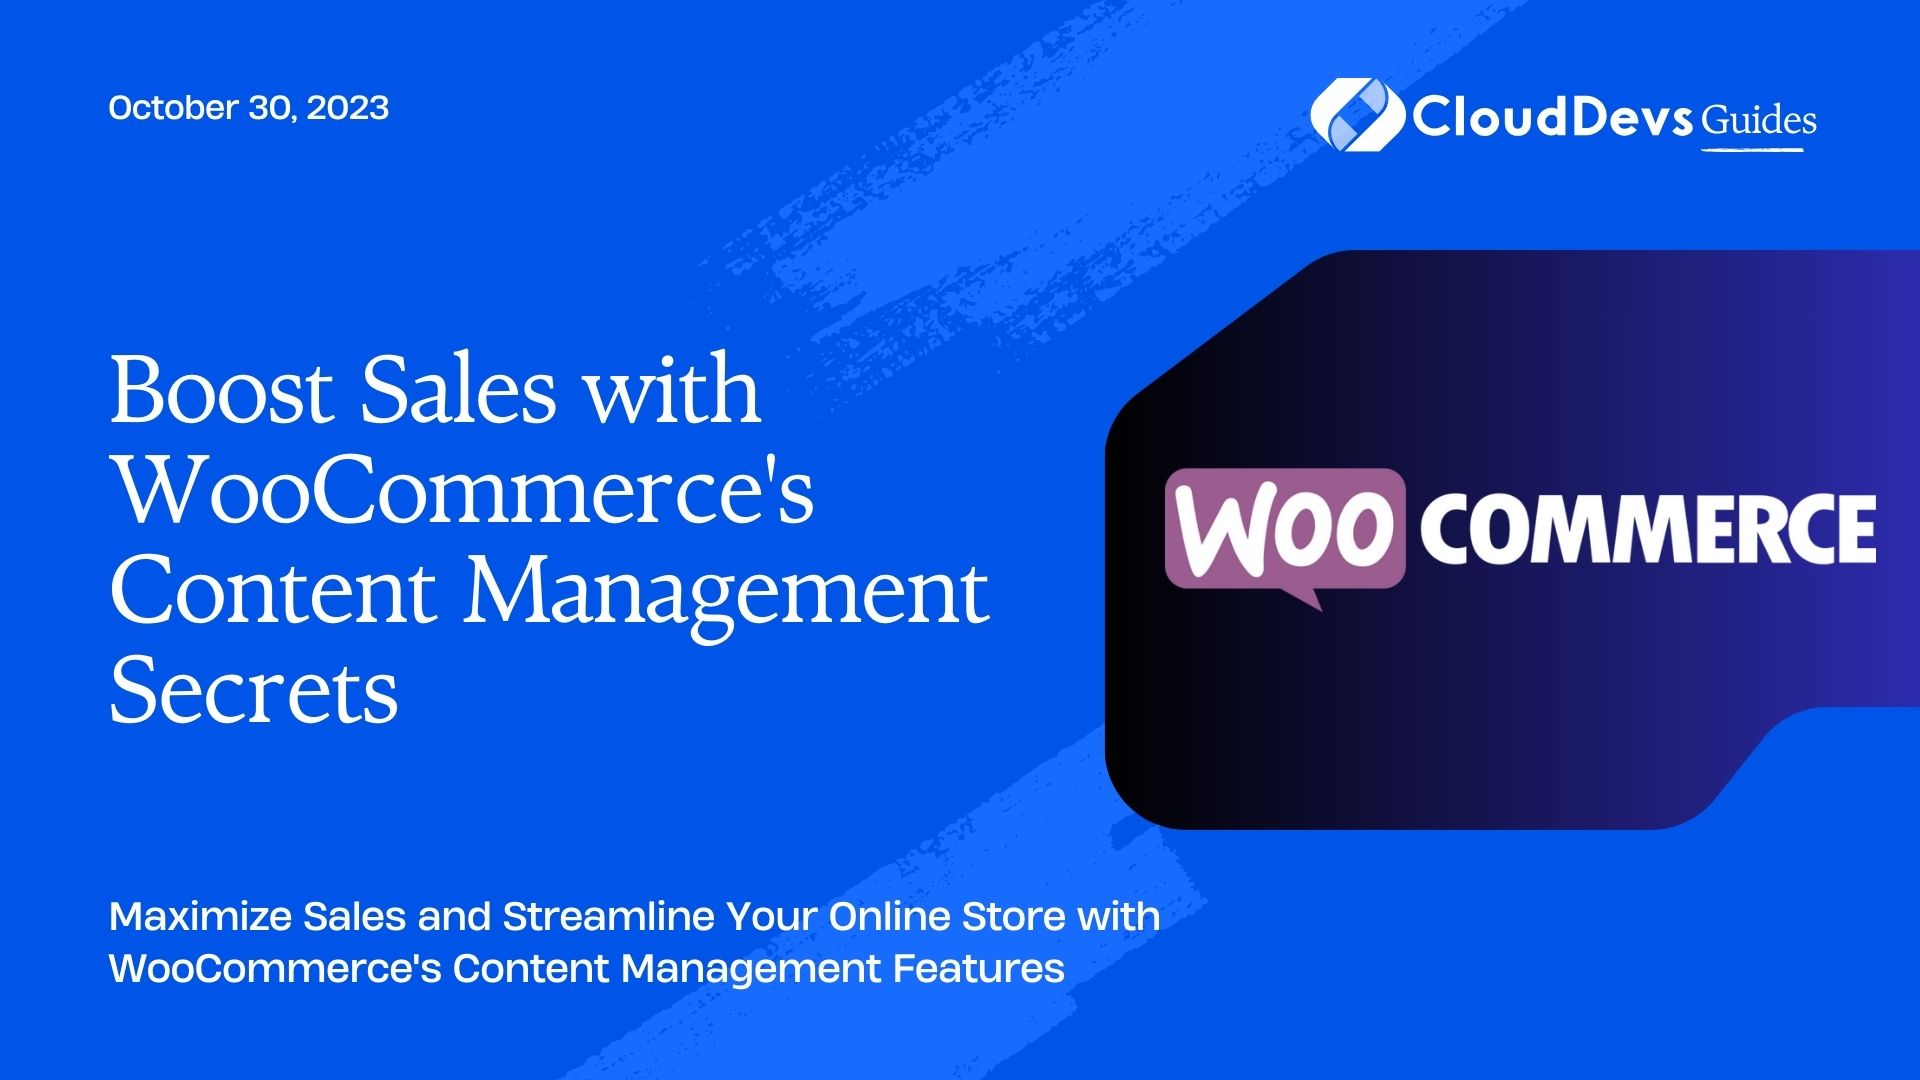 Your Path to Mobile Commerce Excellence Starts Here with WooCommerce